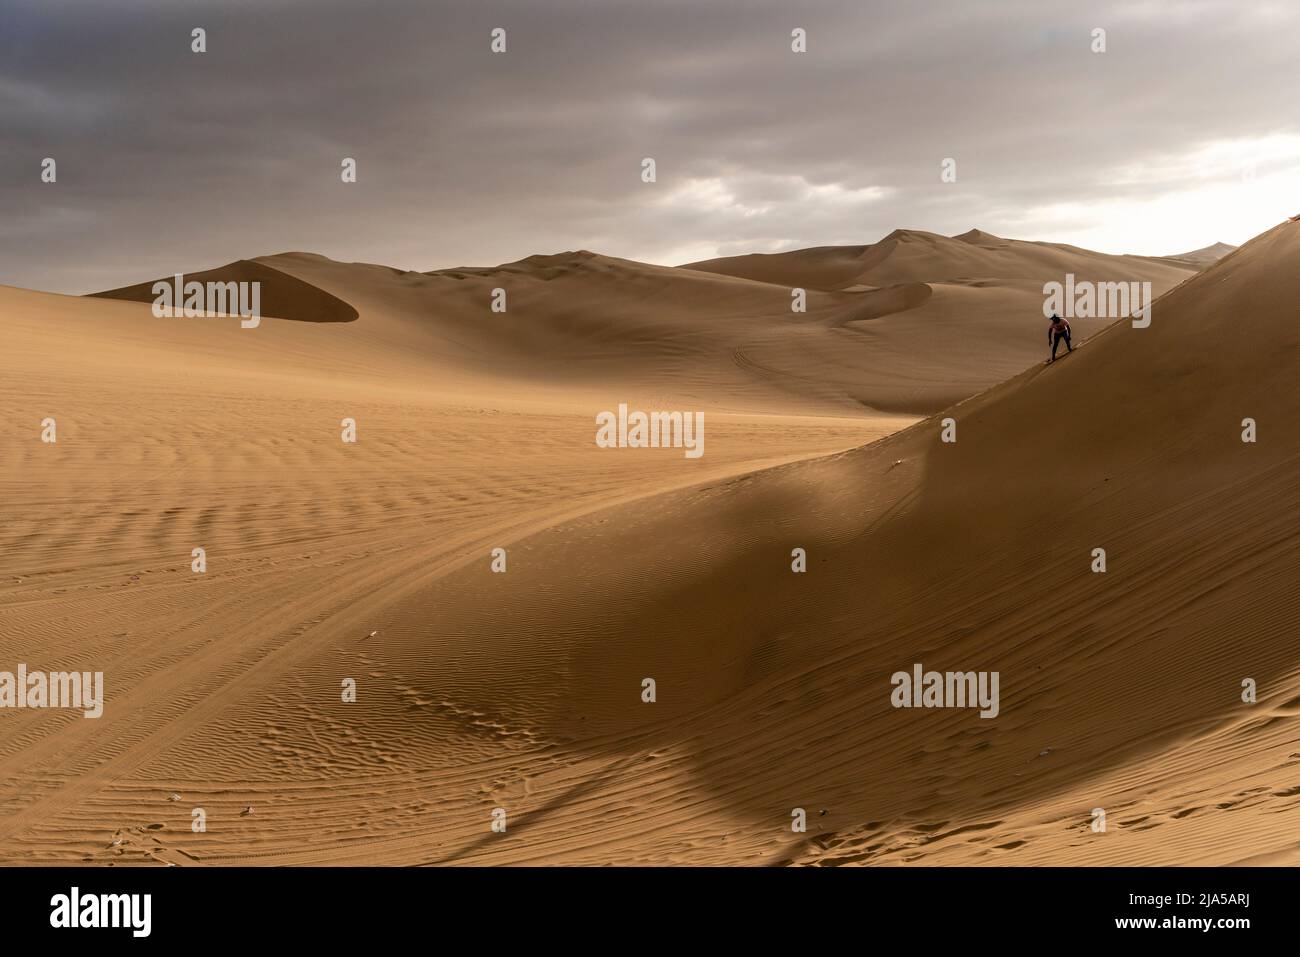 A Man Sandboarding On The Sand Dunes Of Huacachina, Ica Province, Peru. Stock Photo